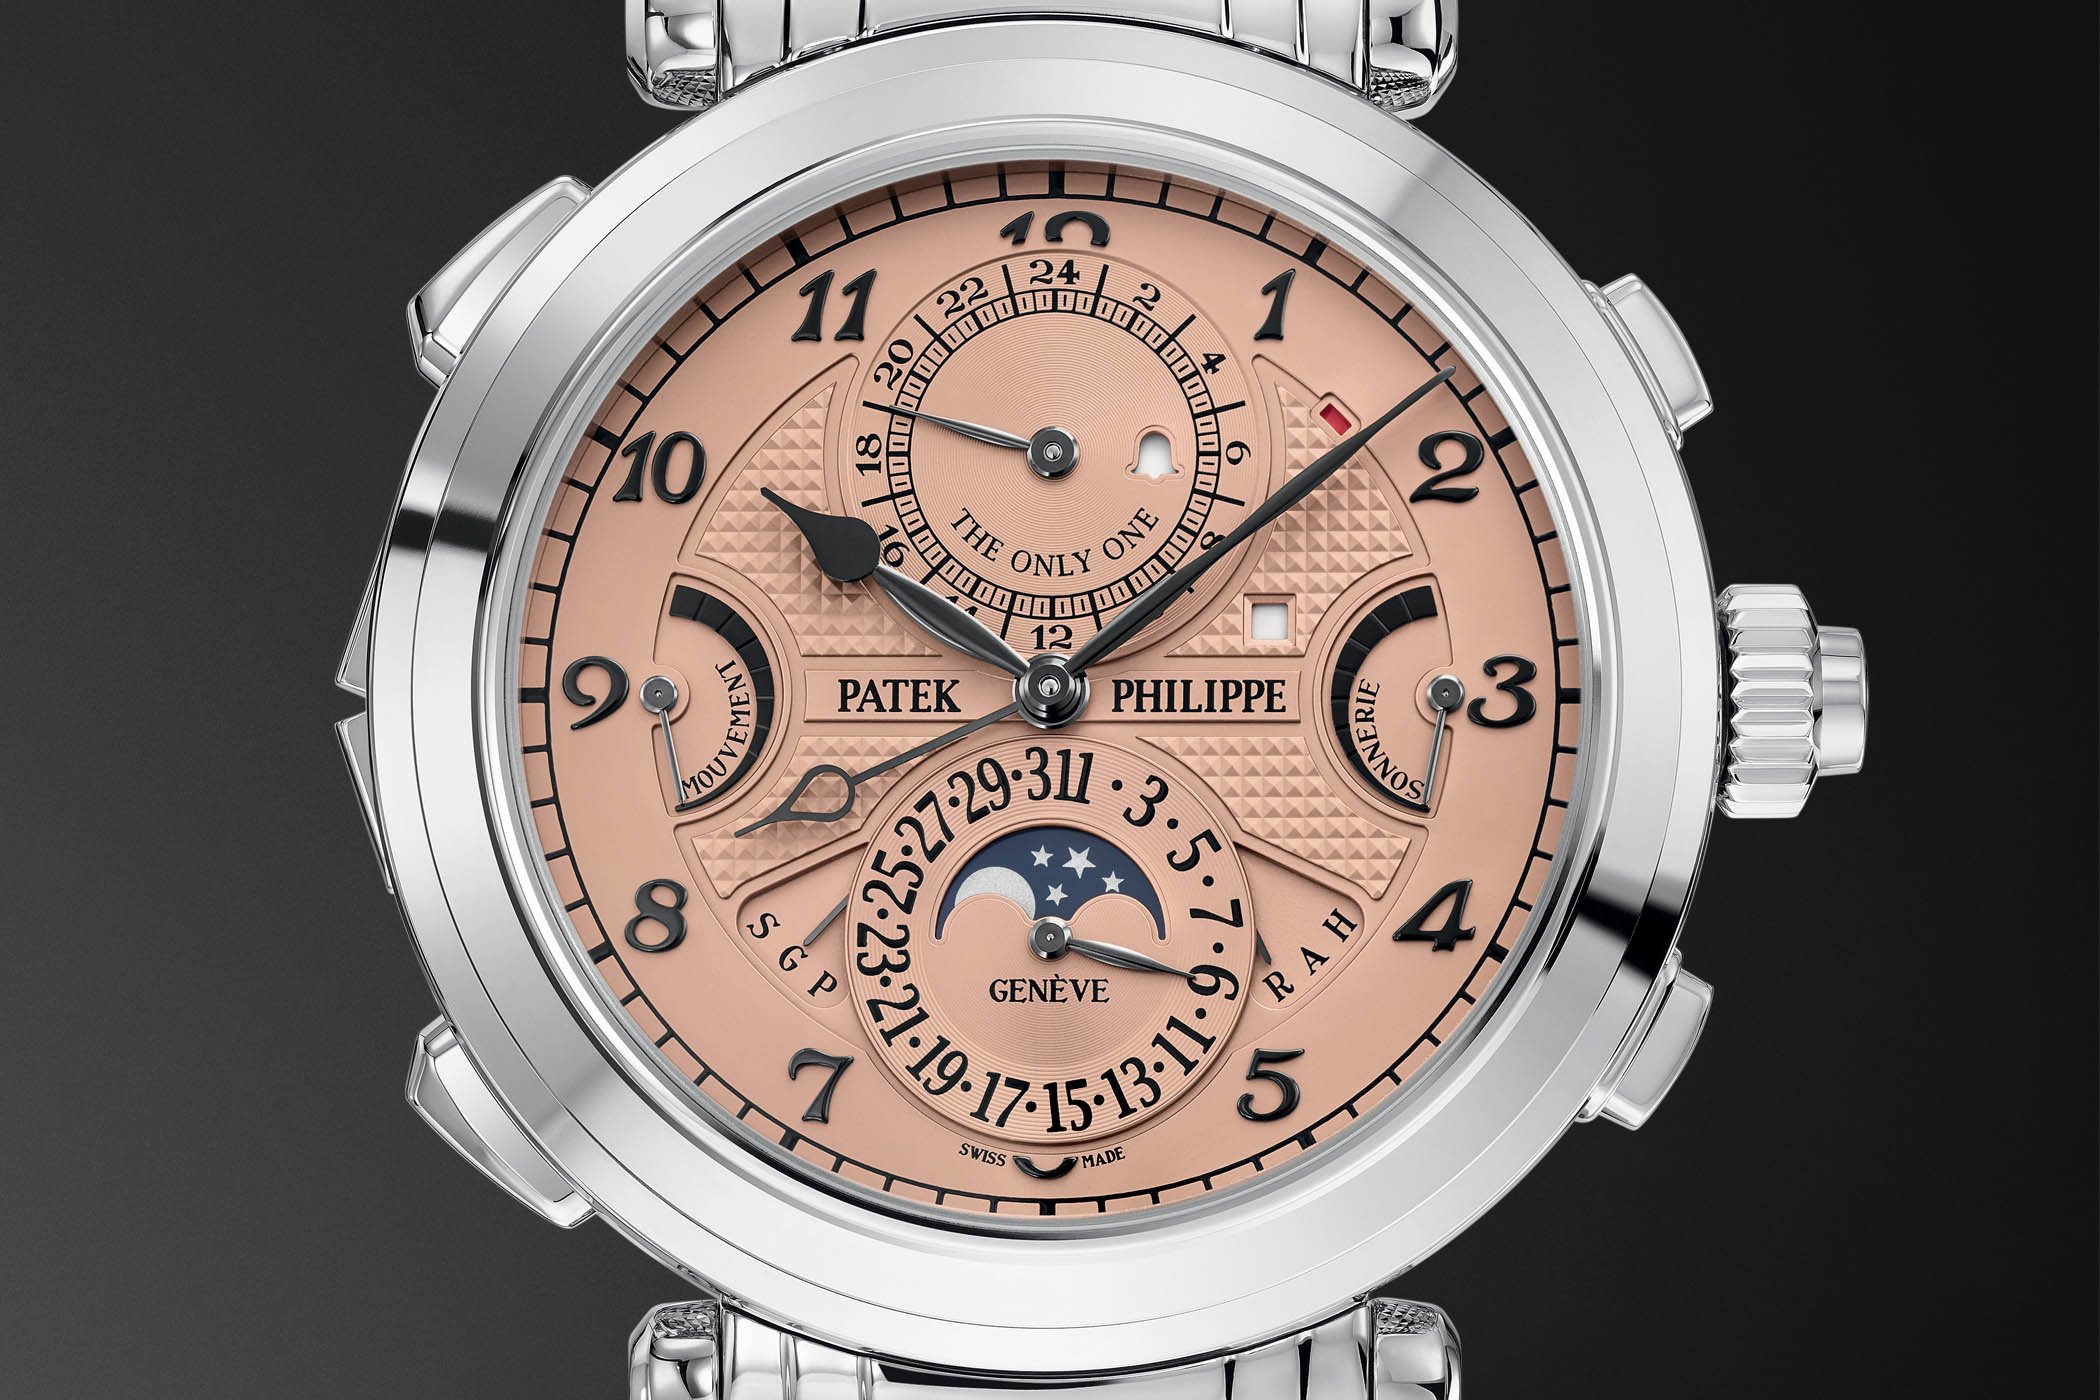 Only Watch 2019 - Patek Philippe 6300A Steel grandmaster chime